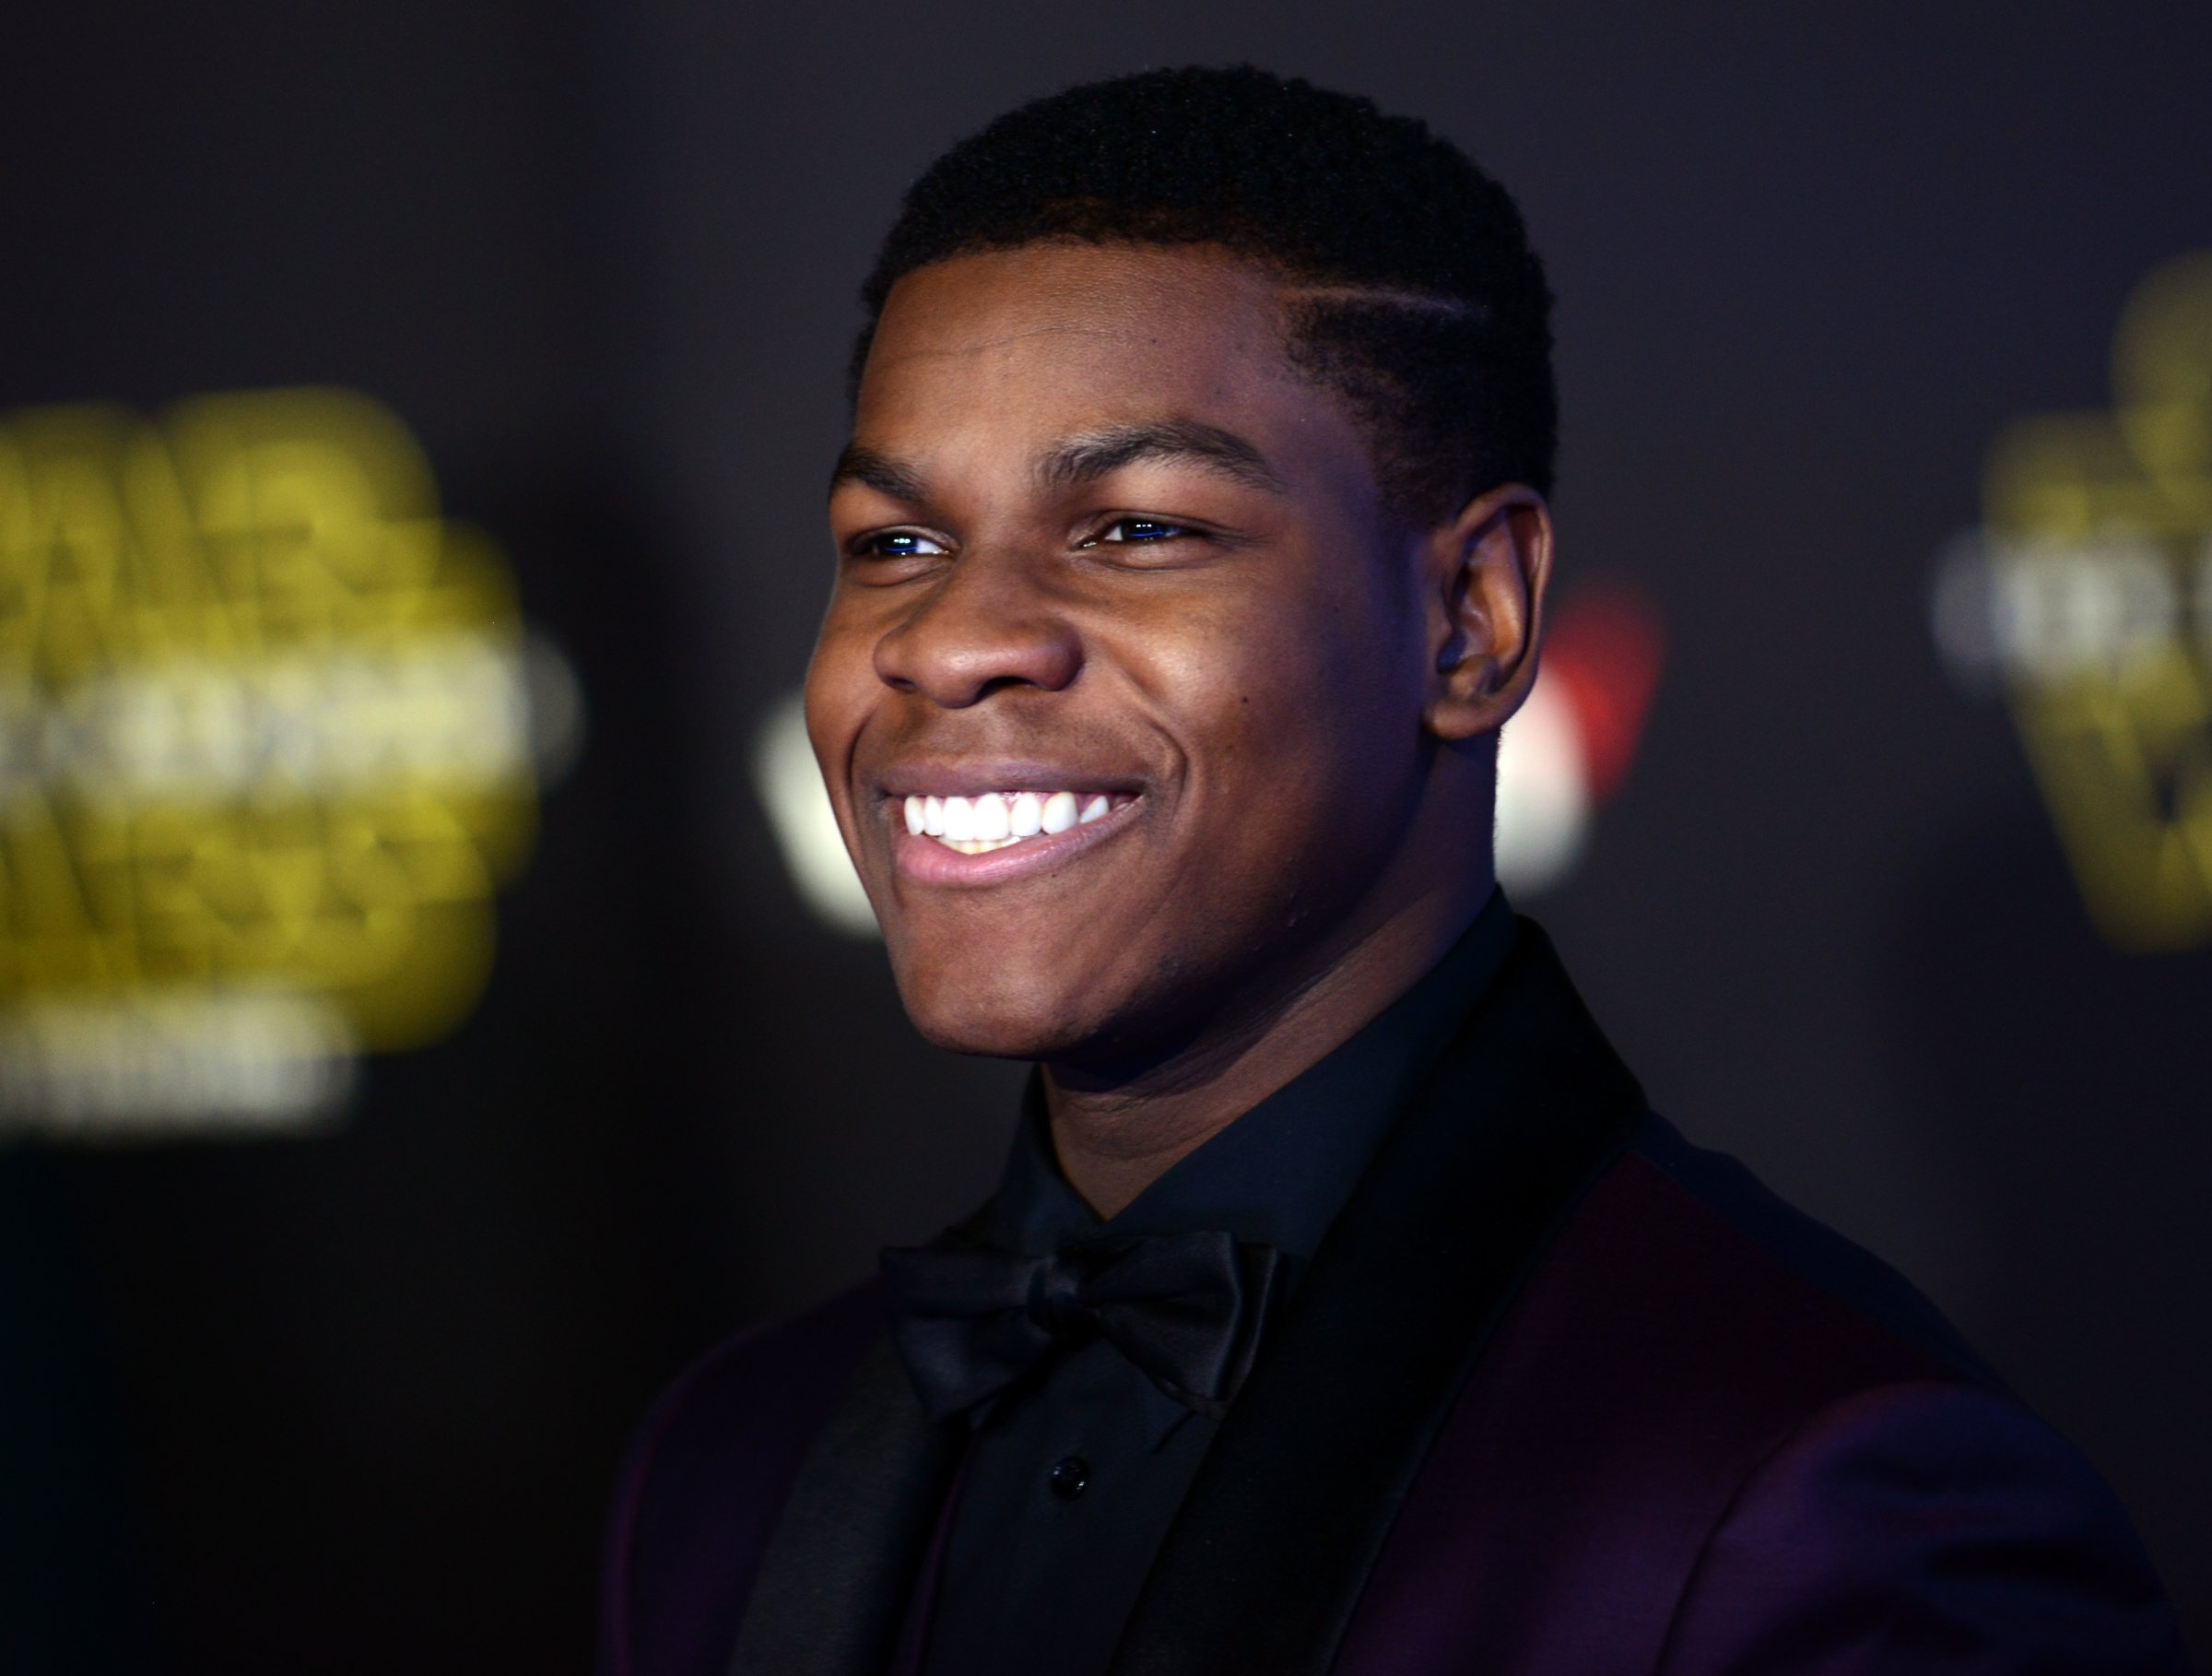 arrives for the Premiere Of Walt Disney Pictures And Lucasfilm's "Star Wars: The Force Awakens"  held on December 14, 2015 in Hollywood, California.